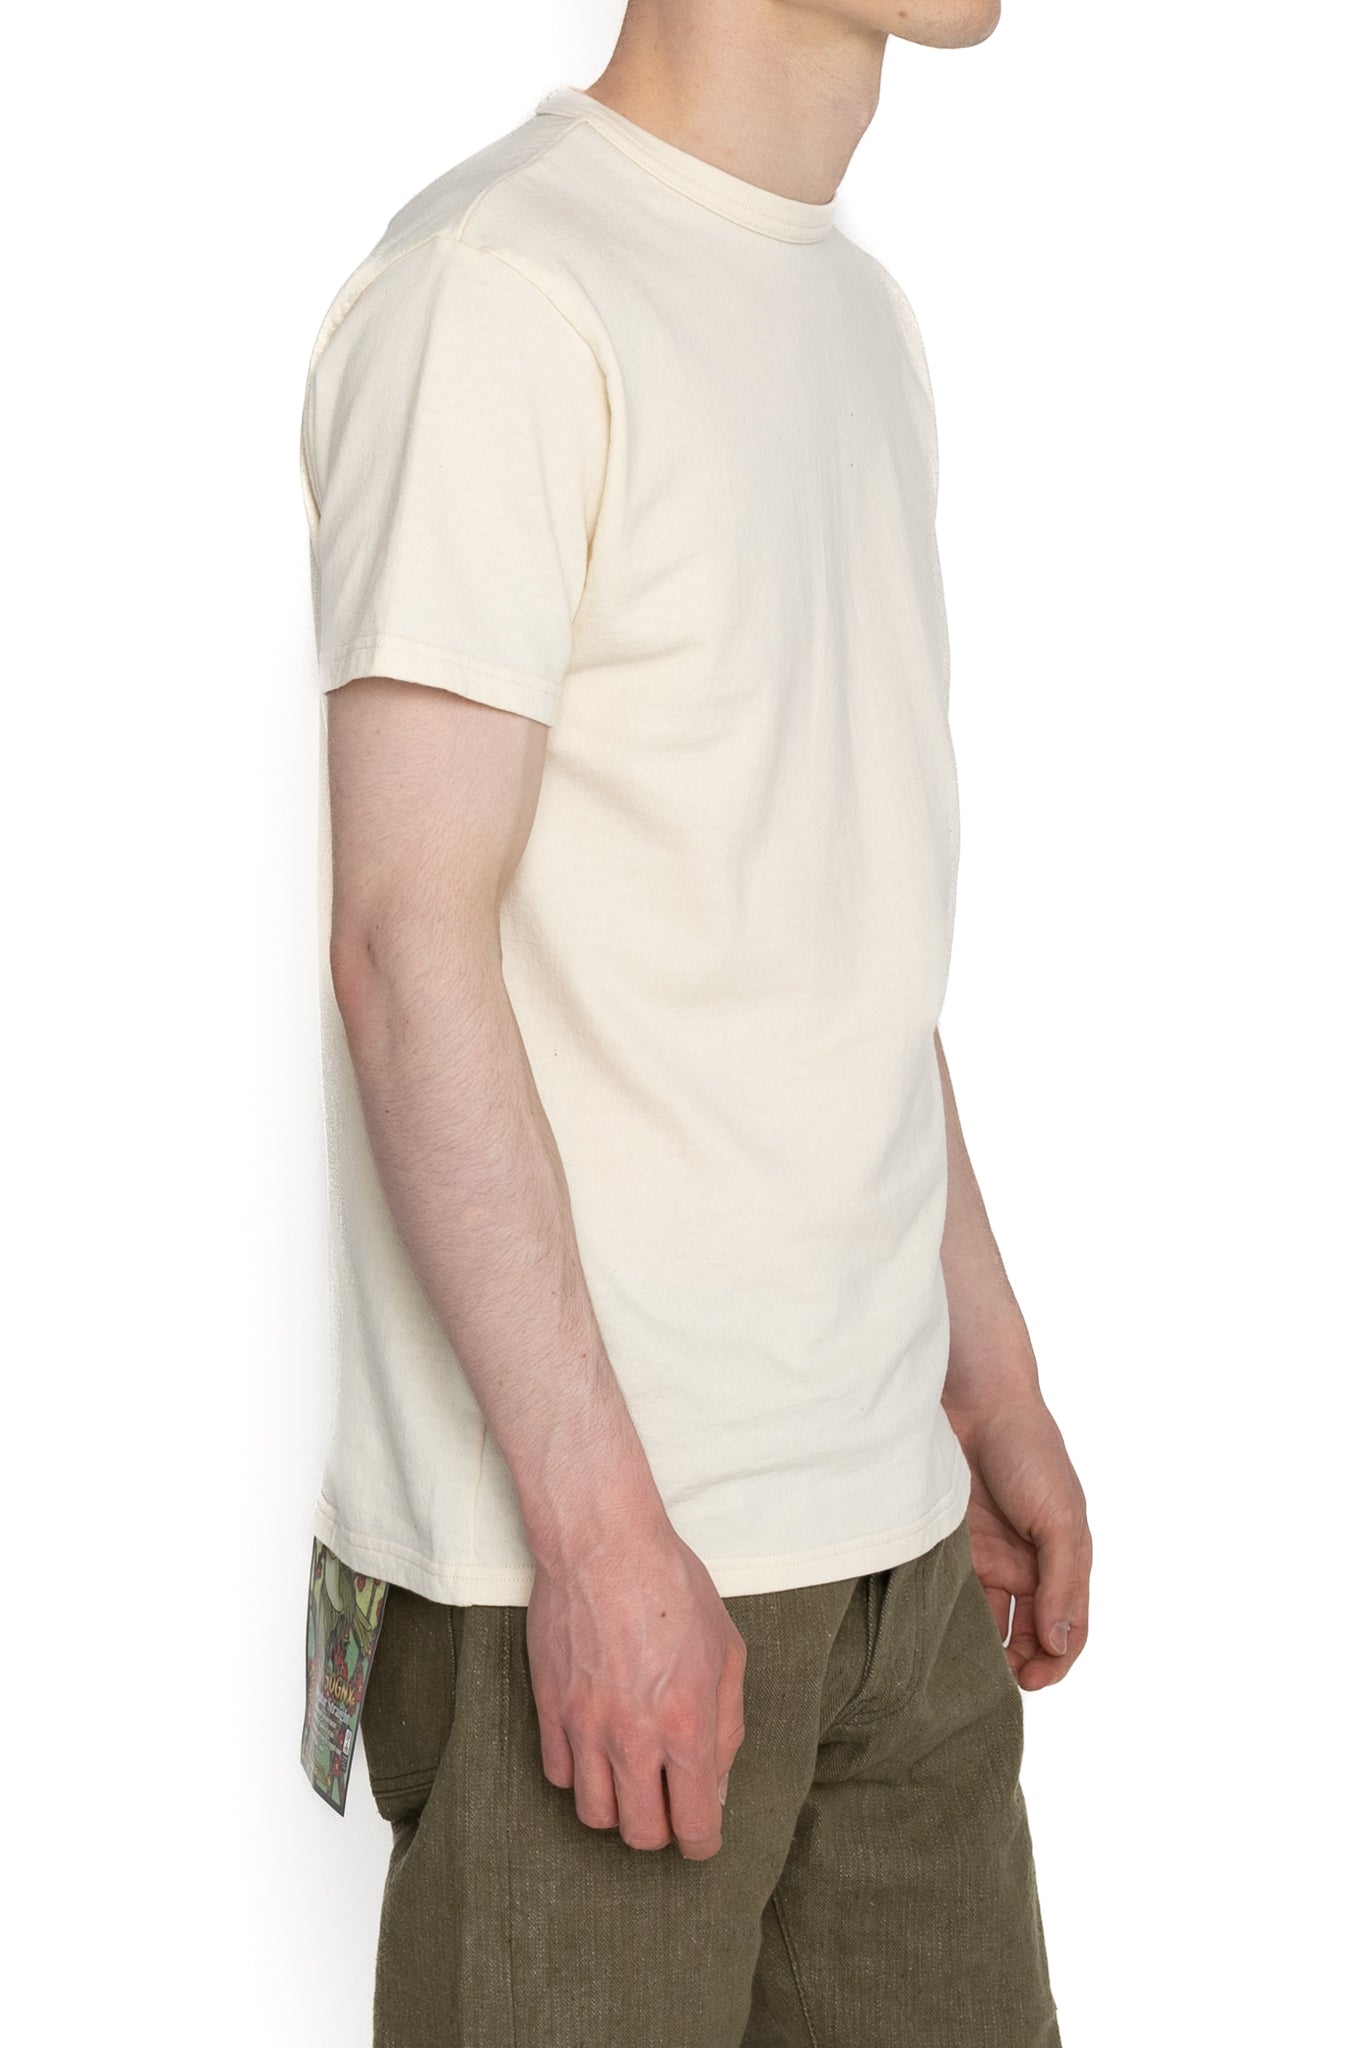 Inlay Solid Tee (Ripened Cotton) - Ivory